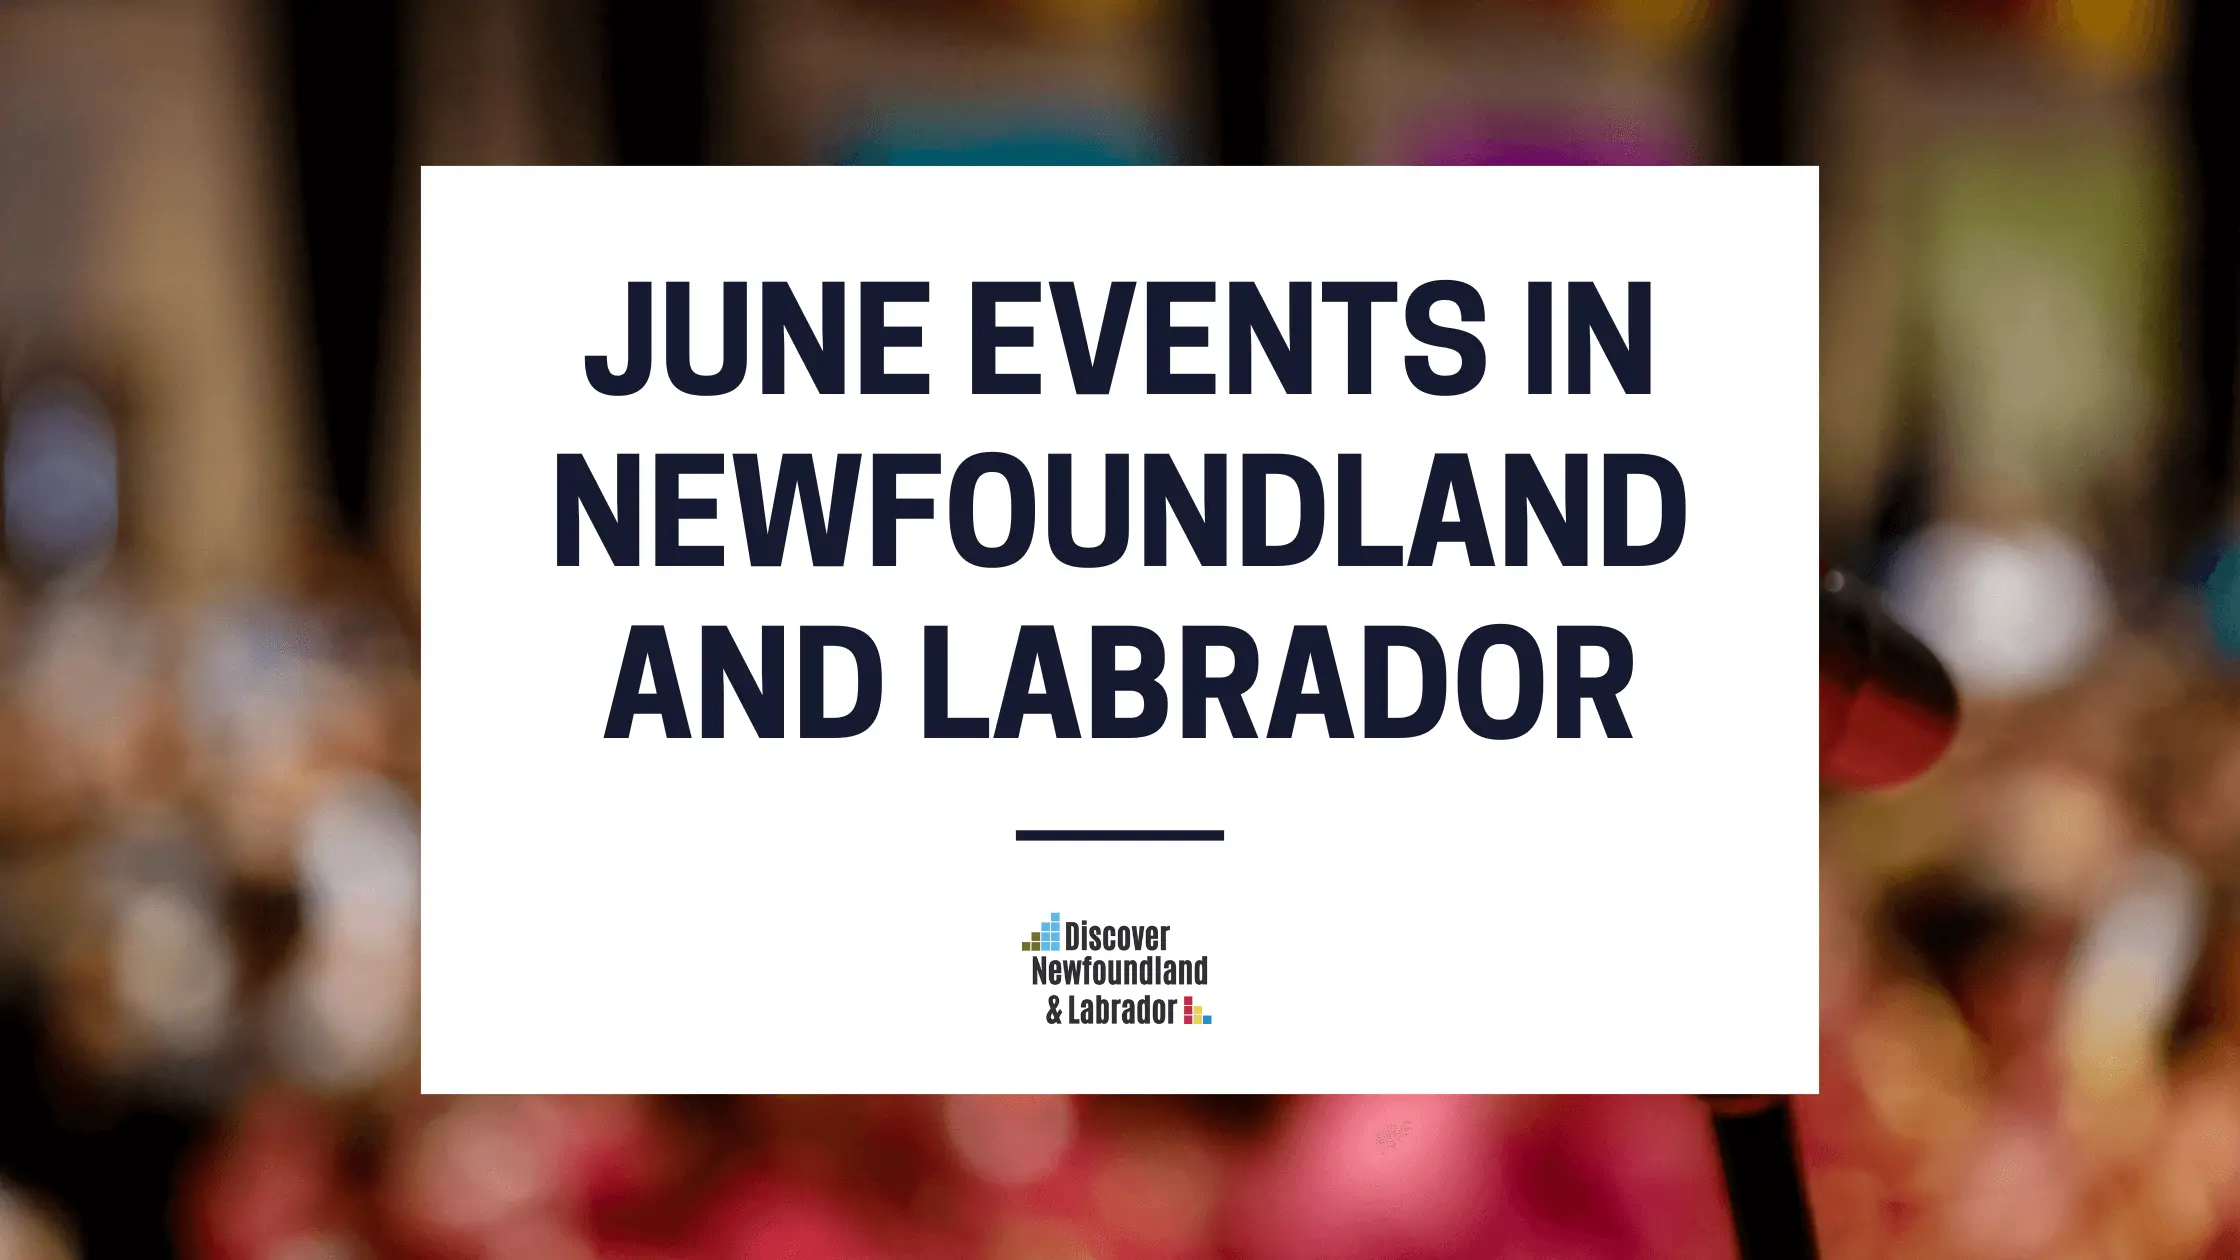 June Events In Newfoundland and Labrador